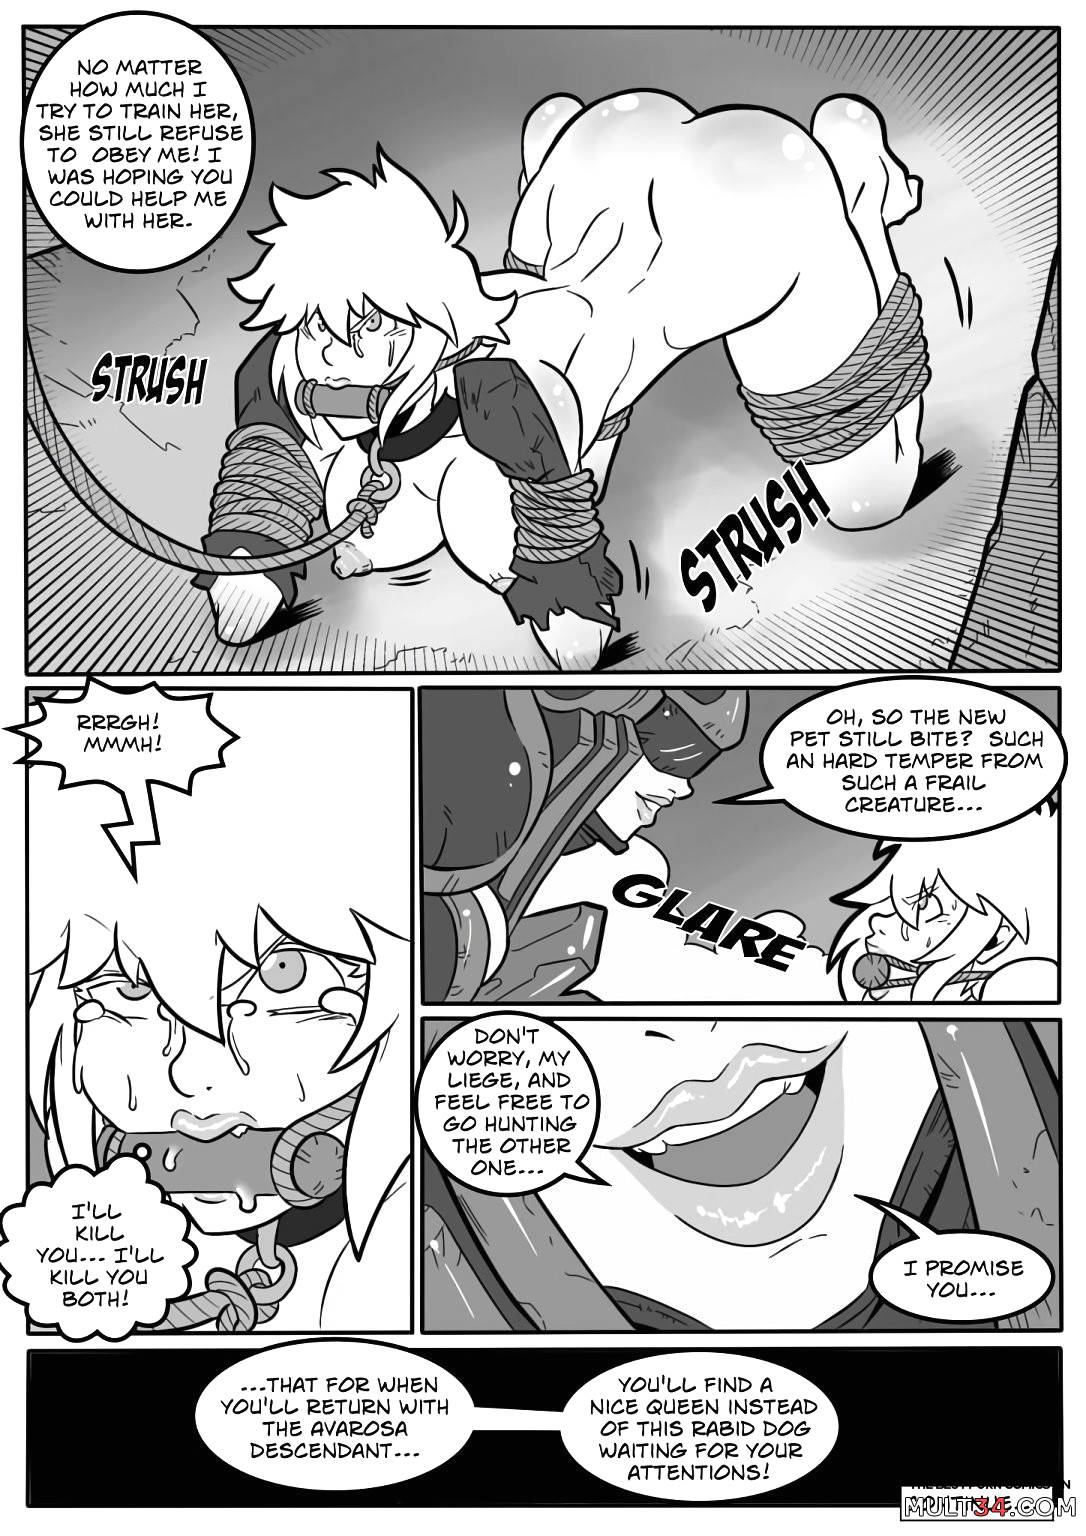 Tales of the Troll King 2 page 16